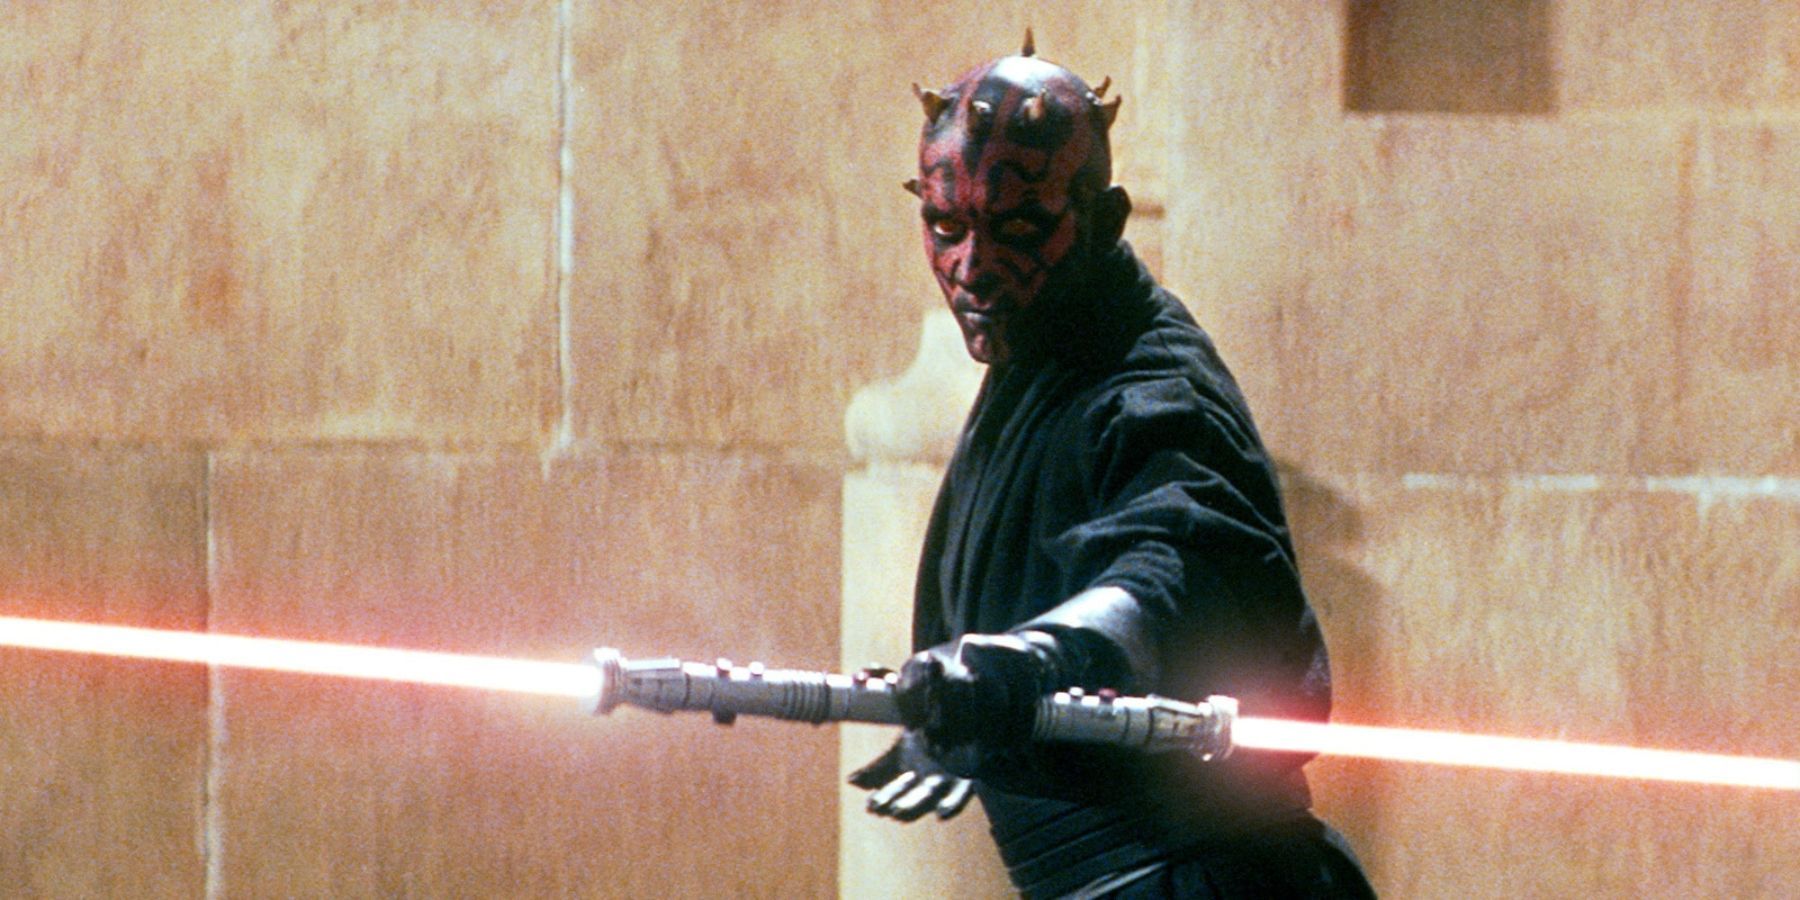 Elden Ring Player Makes Super Accurate Darth Maul Character